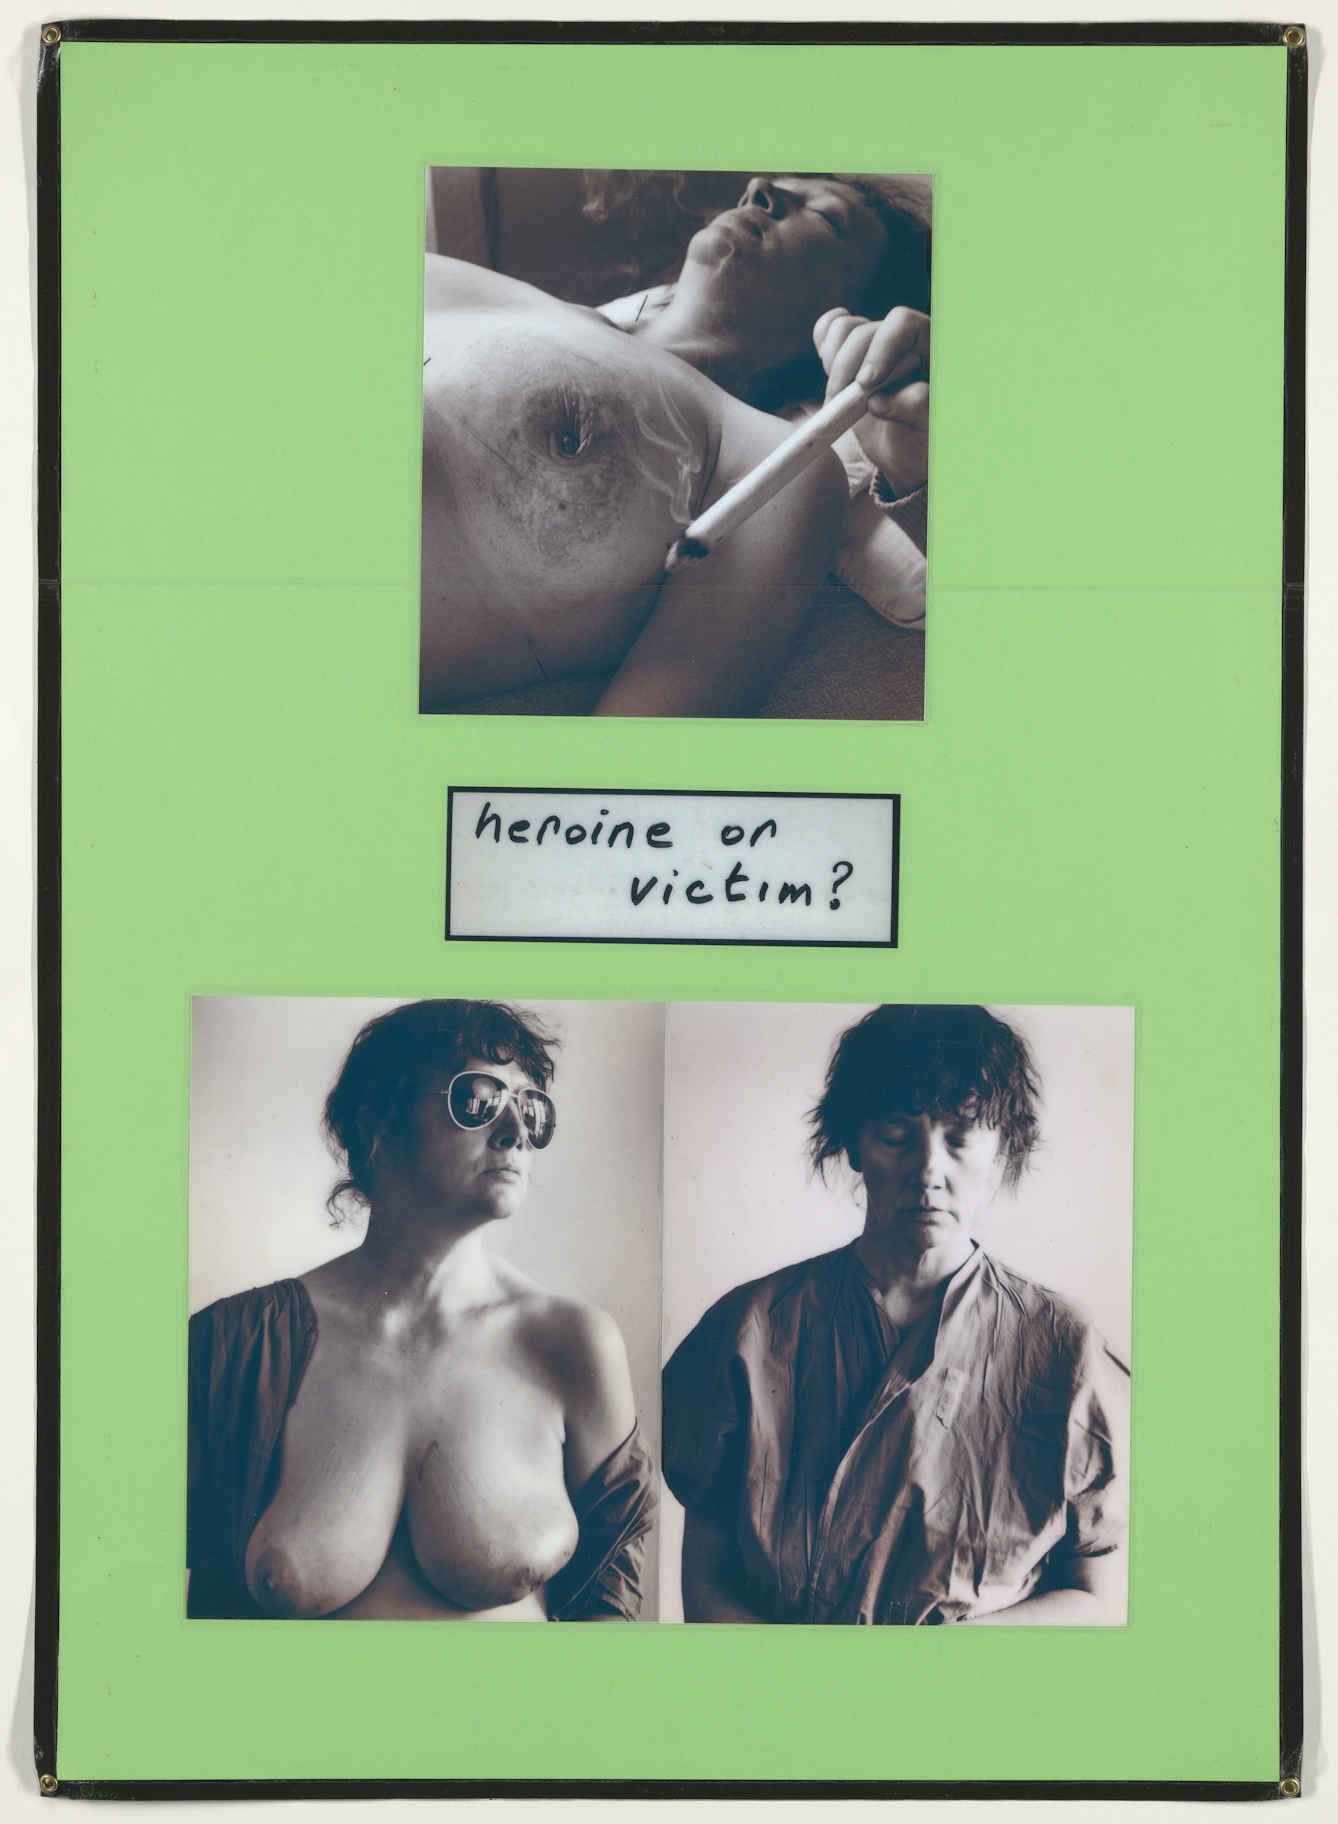 Photograph of a green sheet of paper with 3 black and white photographs mounted on top. One image shows a woman lying down with her eyes closed, her left breast exposed. The hand of another person is holding a smoking tube of paper near to the breast of the woman lying down. The other two photographs show the same woman sitting up, in one wearing sun glasses with her upper body exposed and in the other without sunglasses and her upper body covered up with a gown. In the centre of the sheet of paper are the handwritten words, "heroine or victim?". The whole collage is laminated.